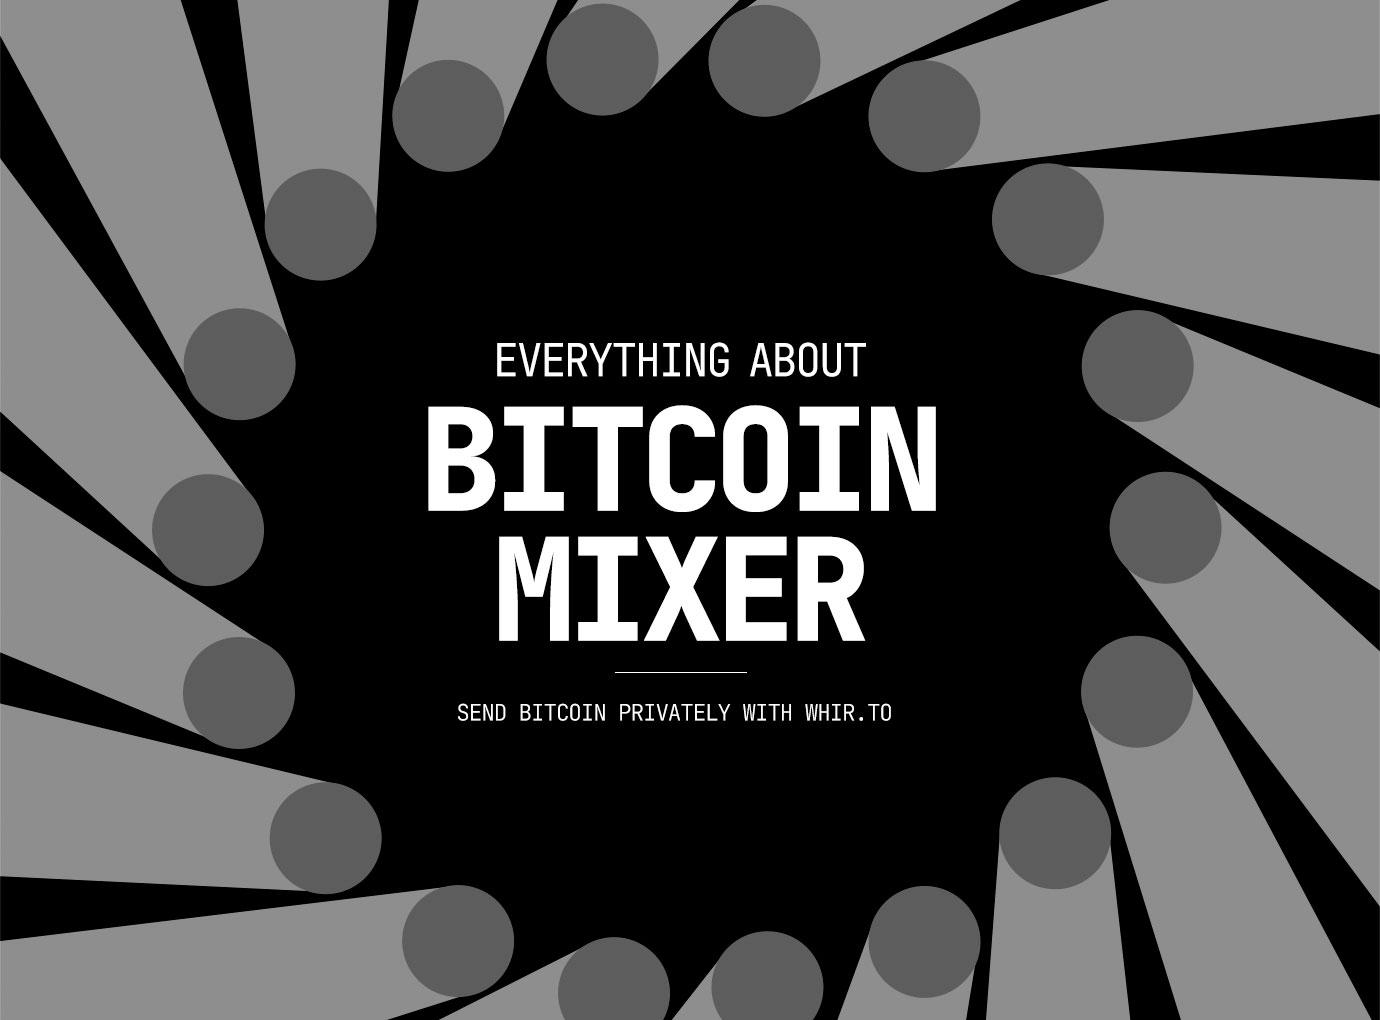 What is a Bitcoin mixer